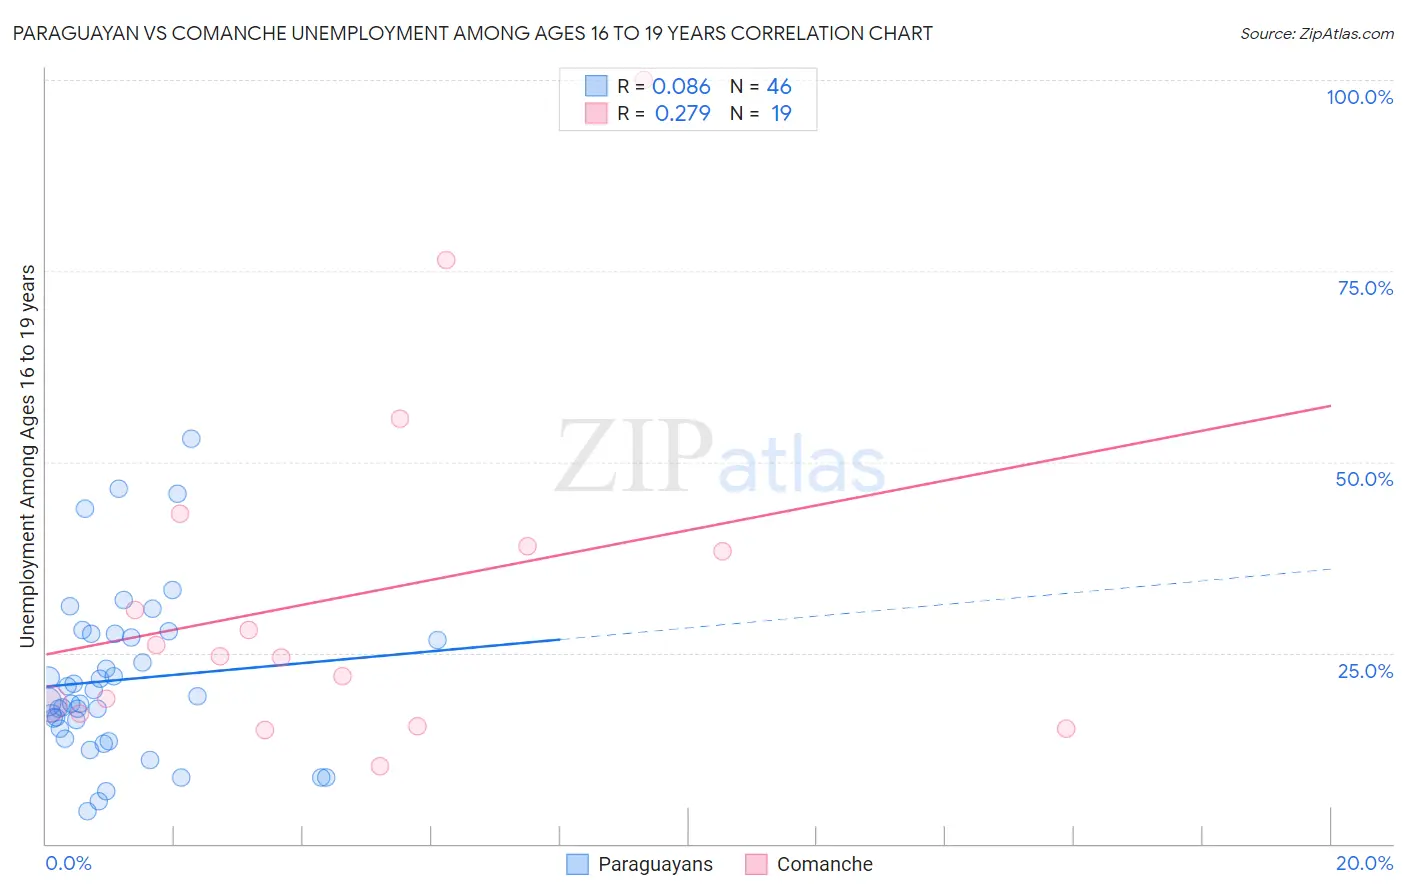 Paraguayan vs Comanche Unemployment Among Ages 16 to 19 years